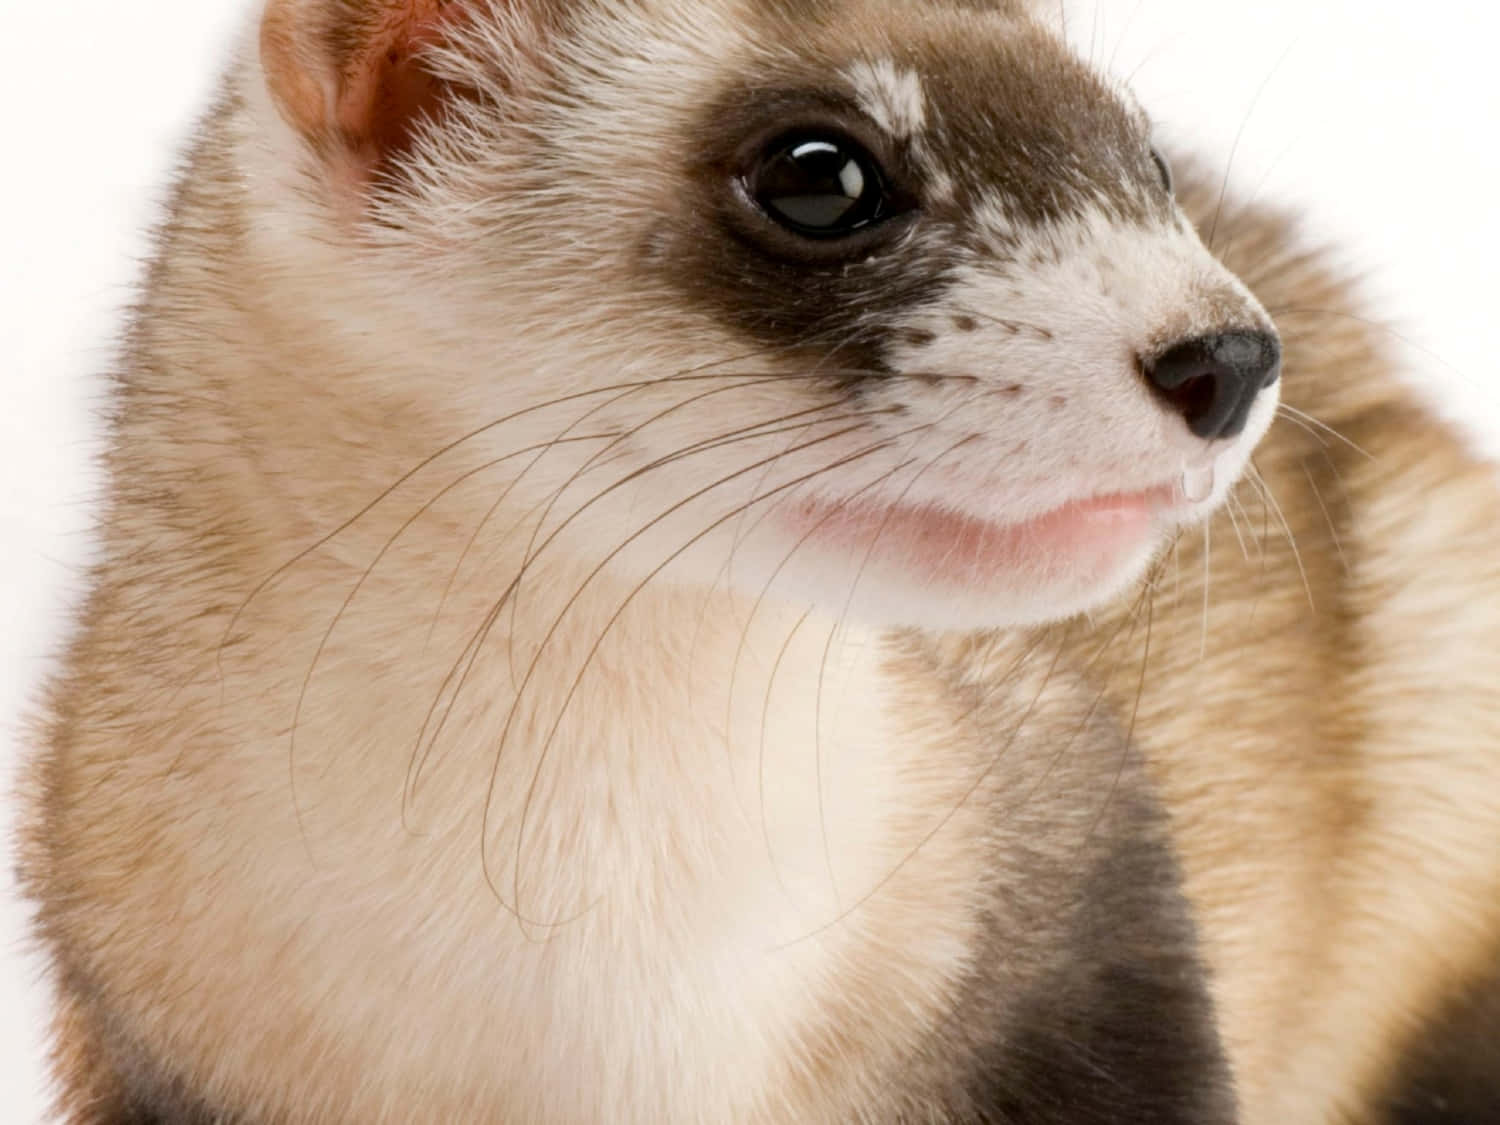 This cuddly ferret would make the perfect companion!